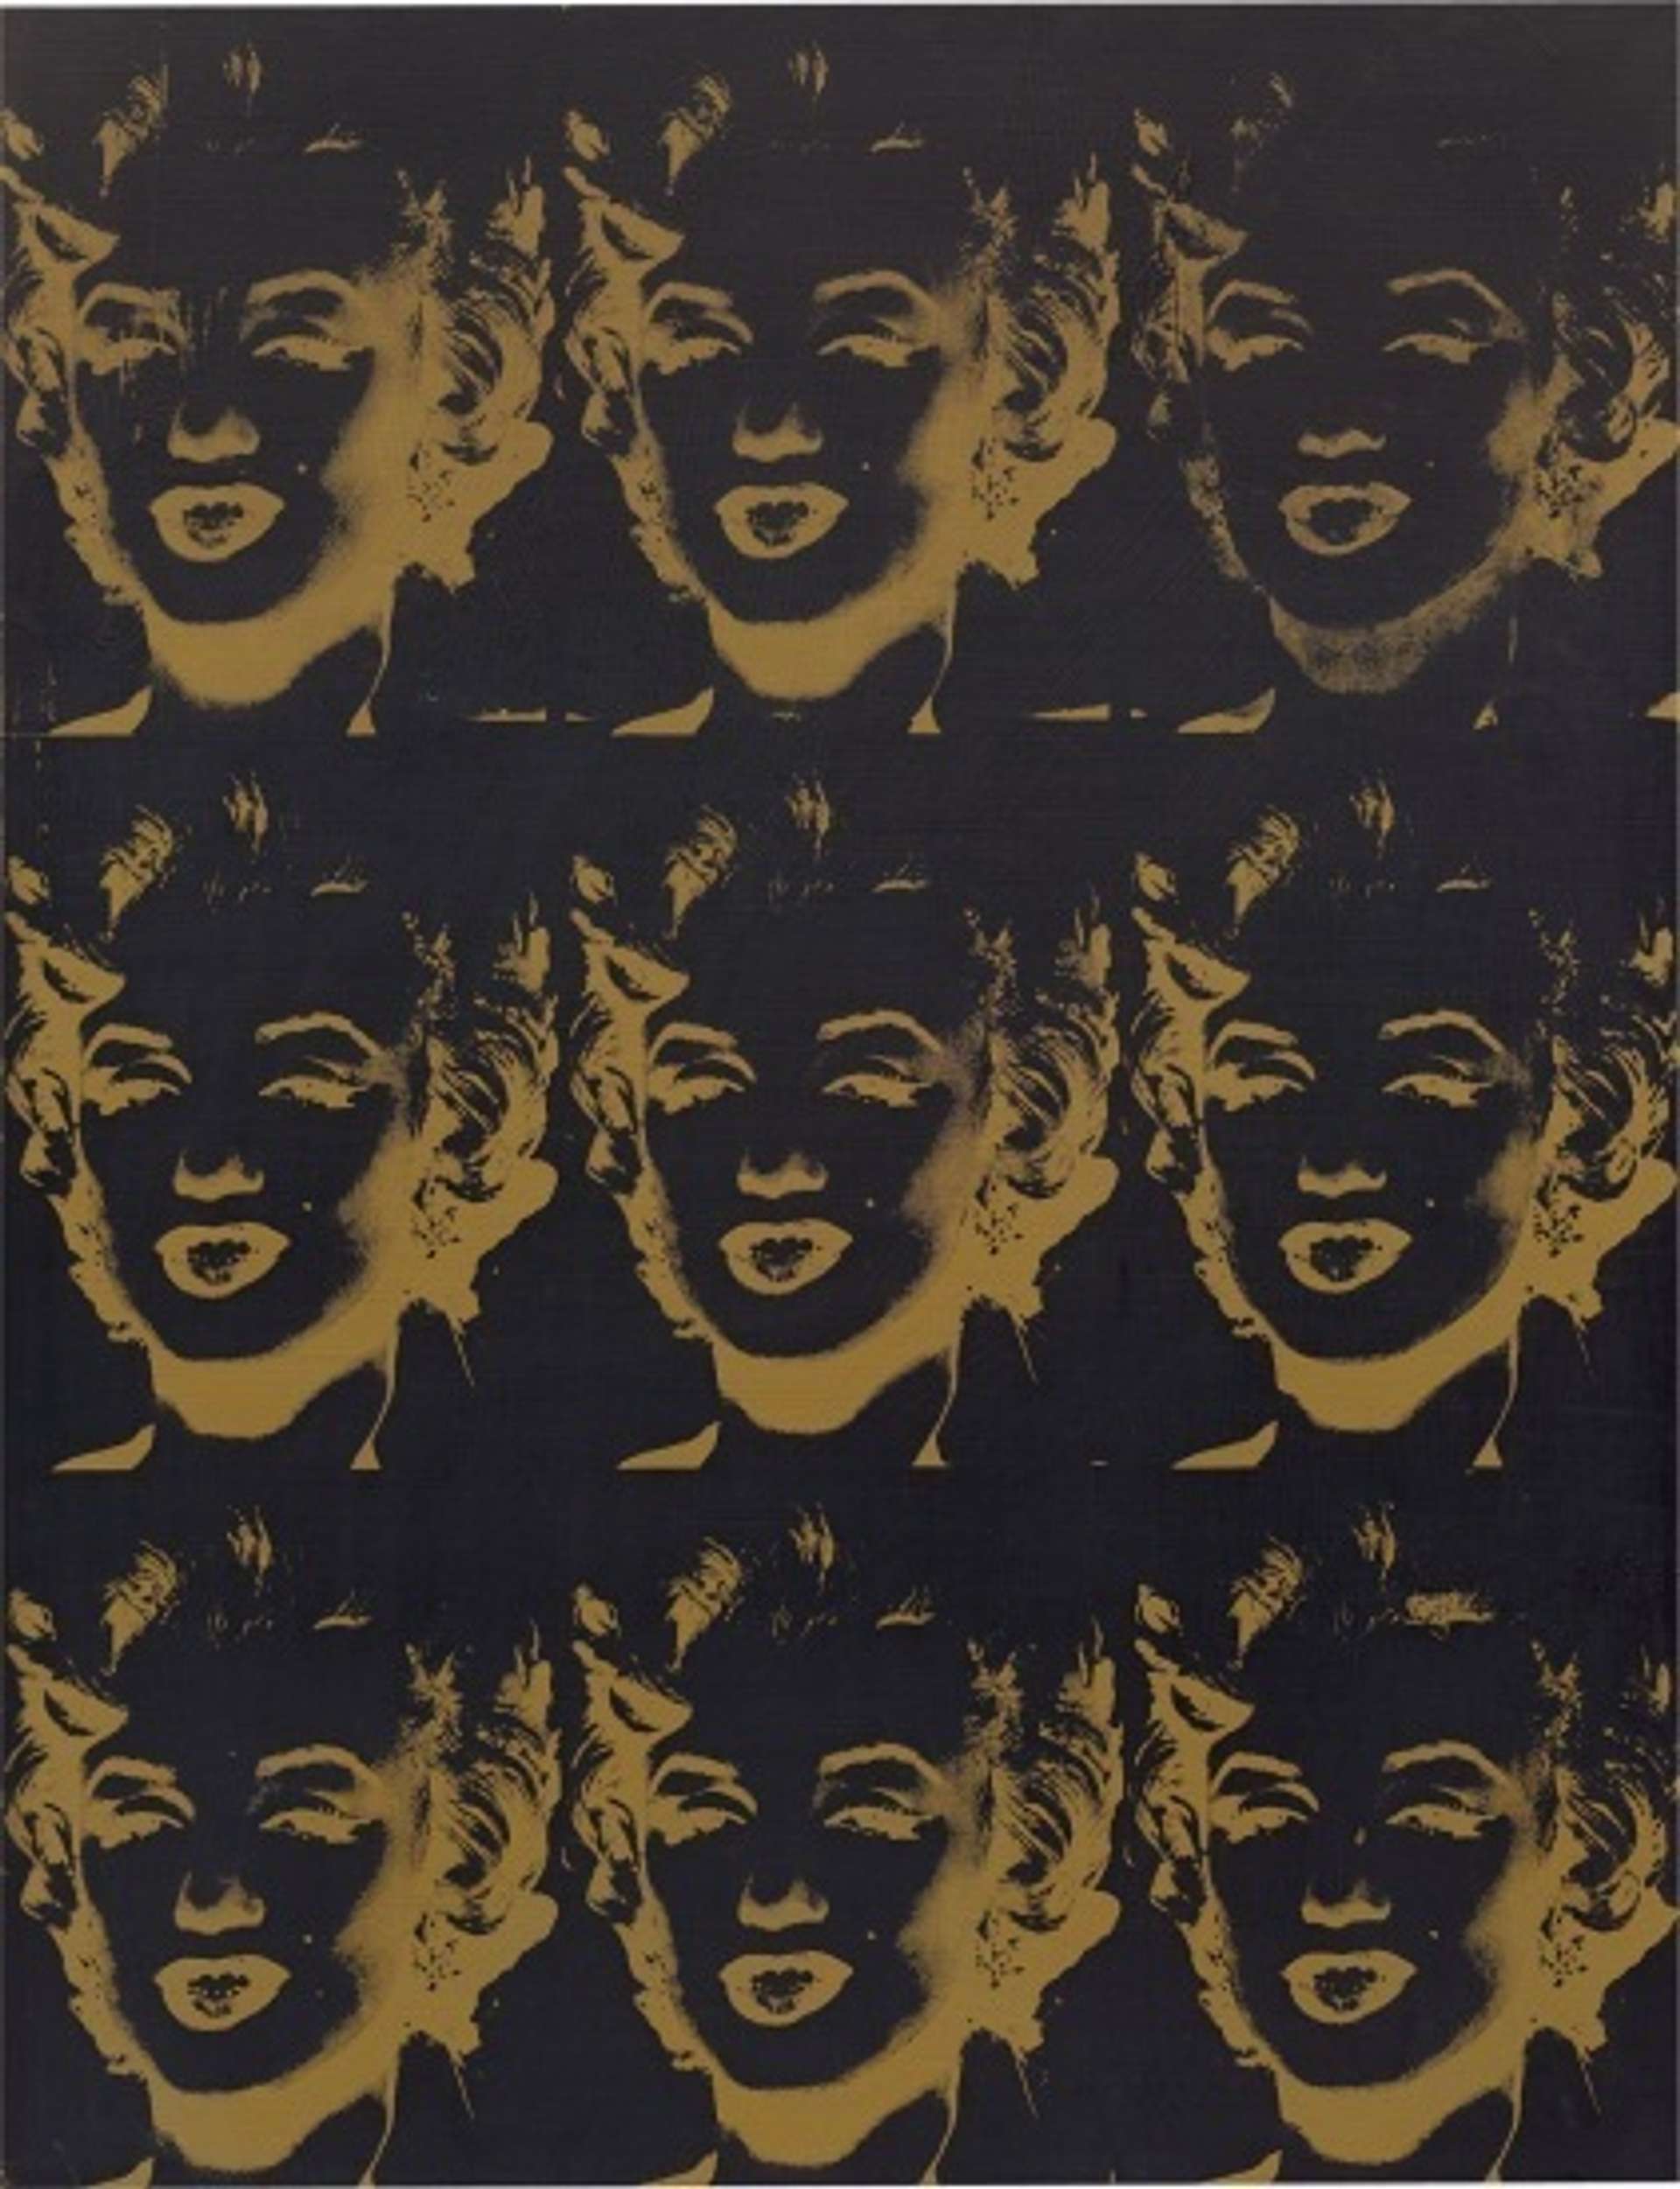 Forty-Five Gold Marilyns by Andy Warhol - MyArtBroker